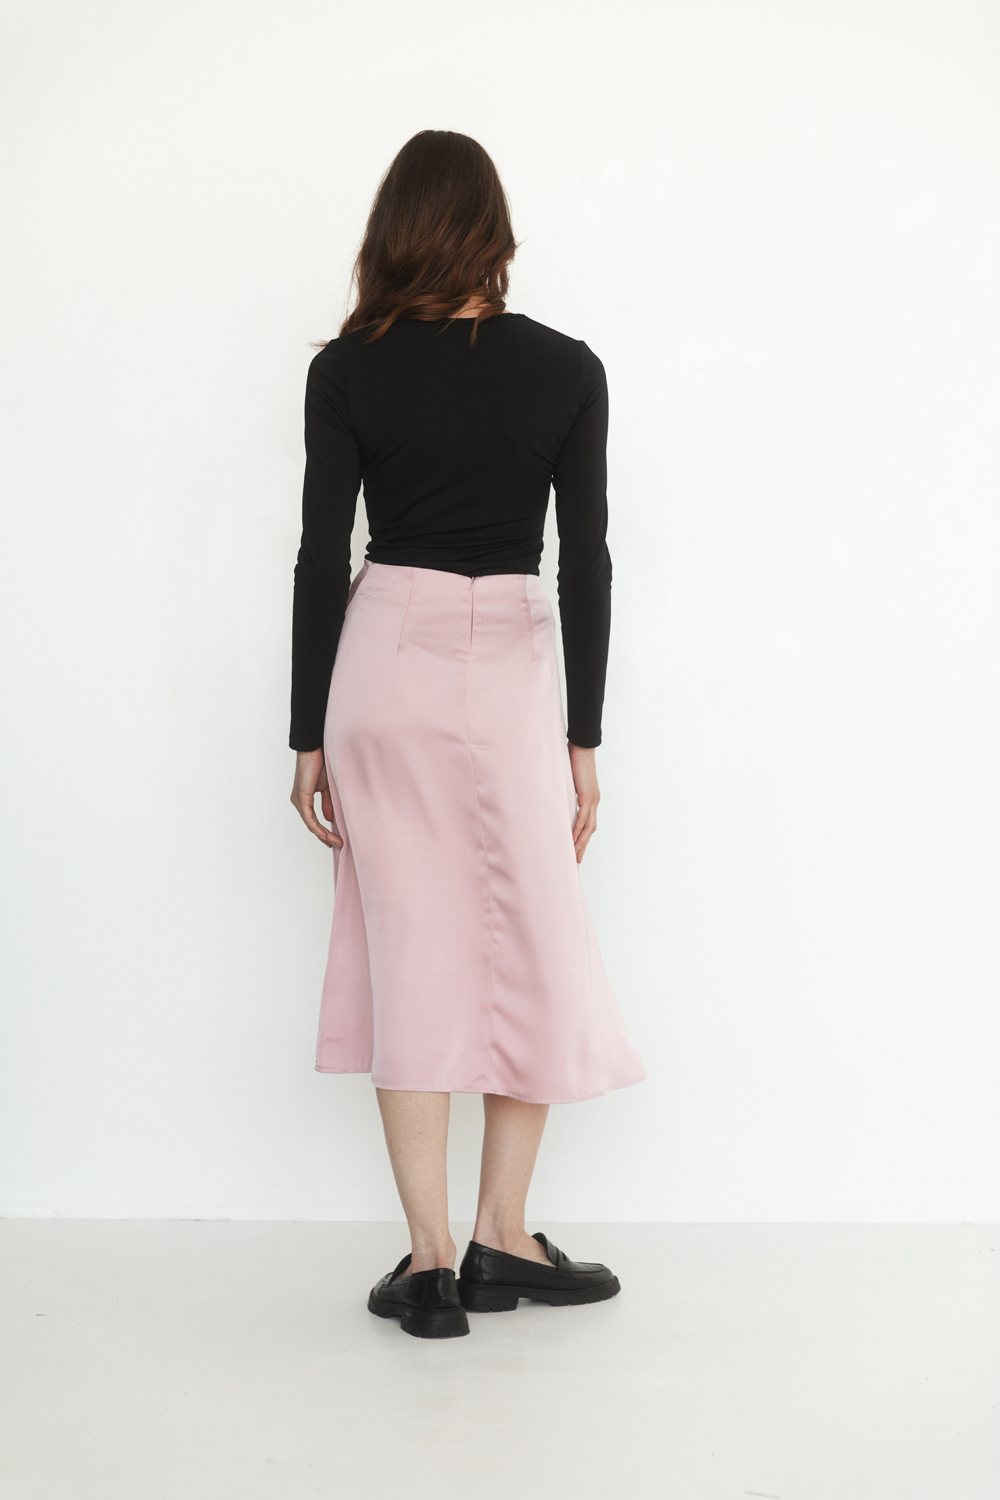 Silk a-line skirt in powder color